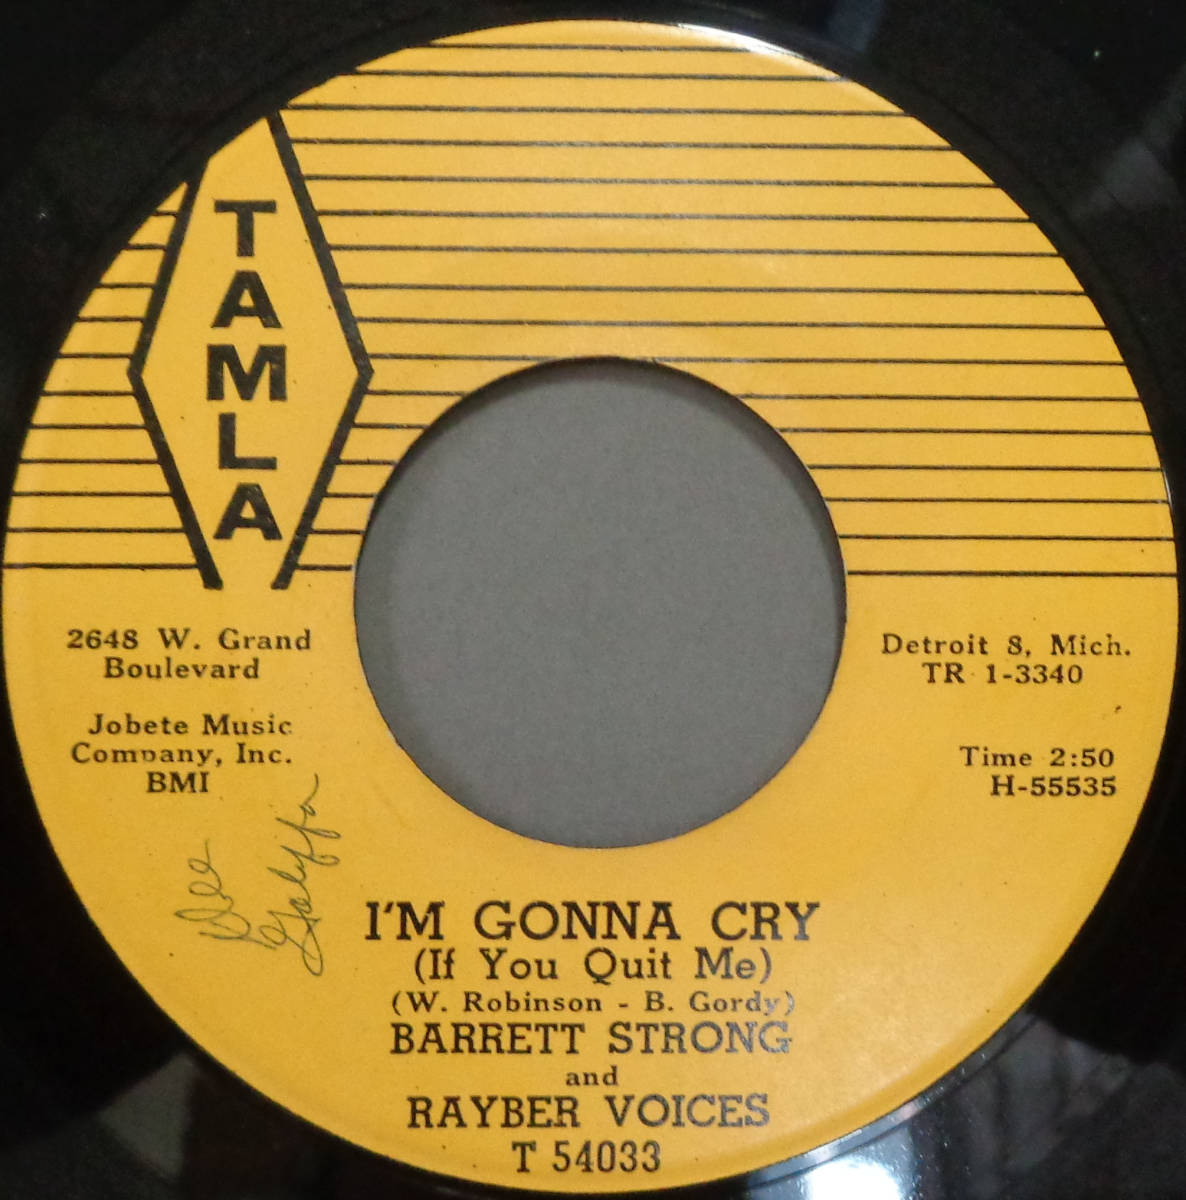 【SOUL 45】BARRETT STRONG & RAYBER VOICES - I'M GONNA CRY / WHIRLWIND (s230929017)の画像1